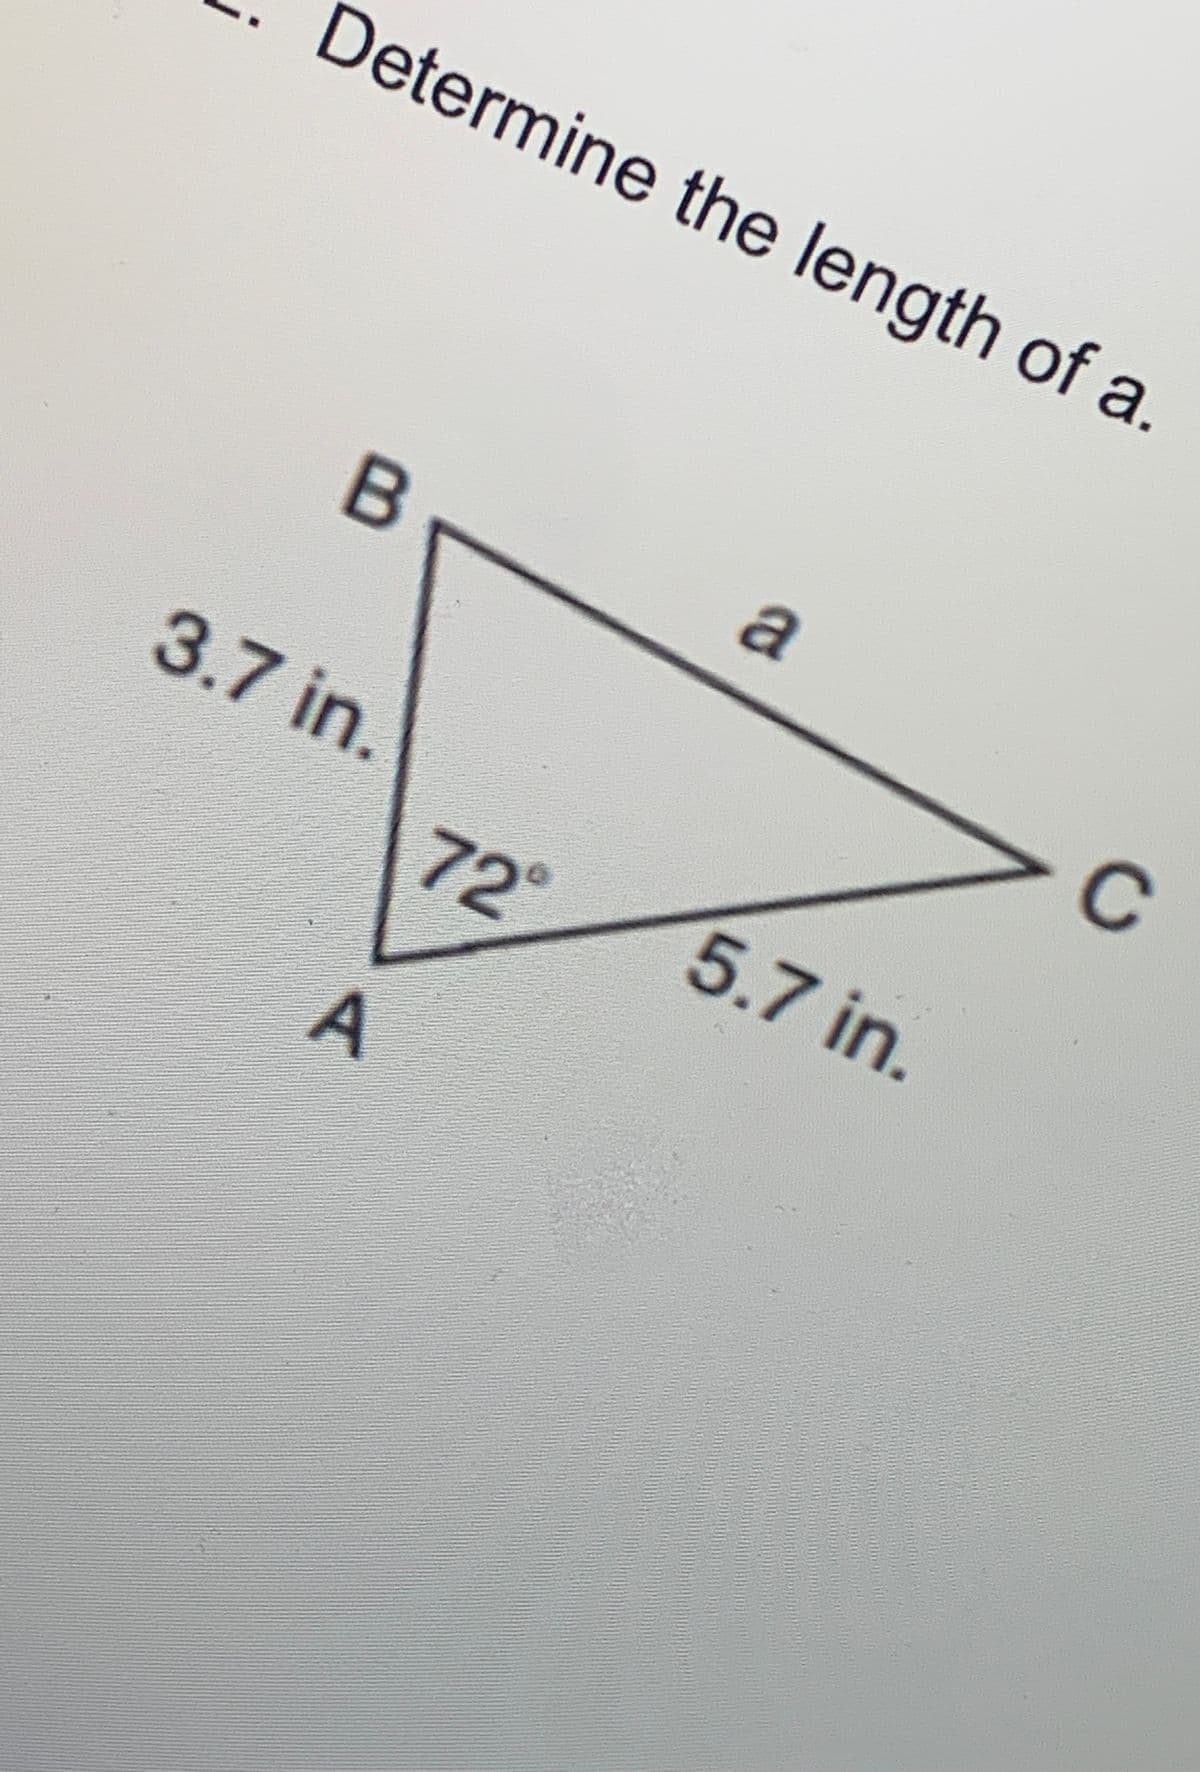 Determine the length of a
C
3.7 in,
72°
5.7 in.
A
a
